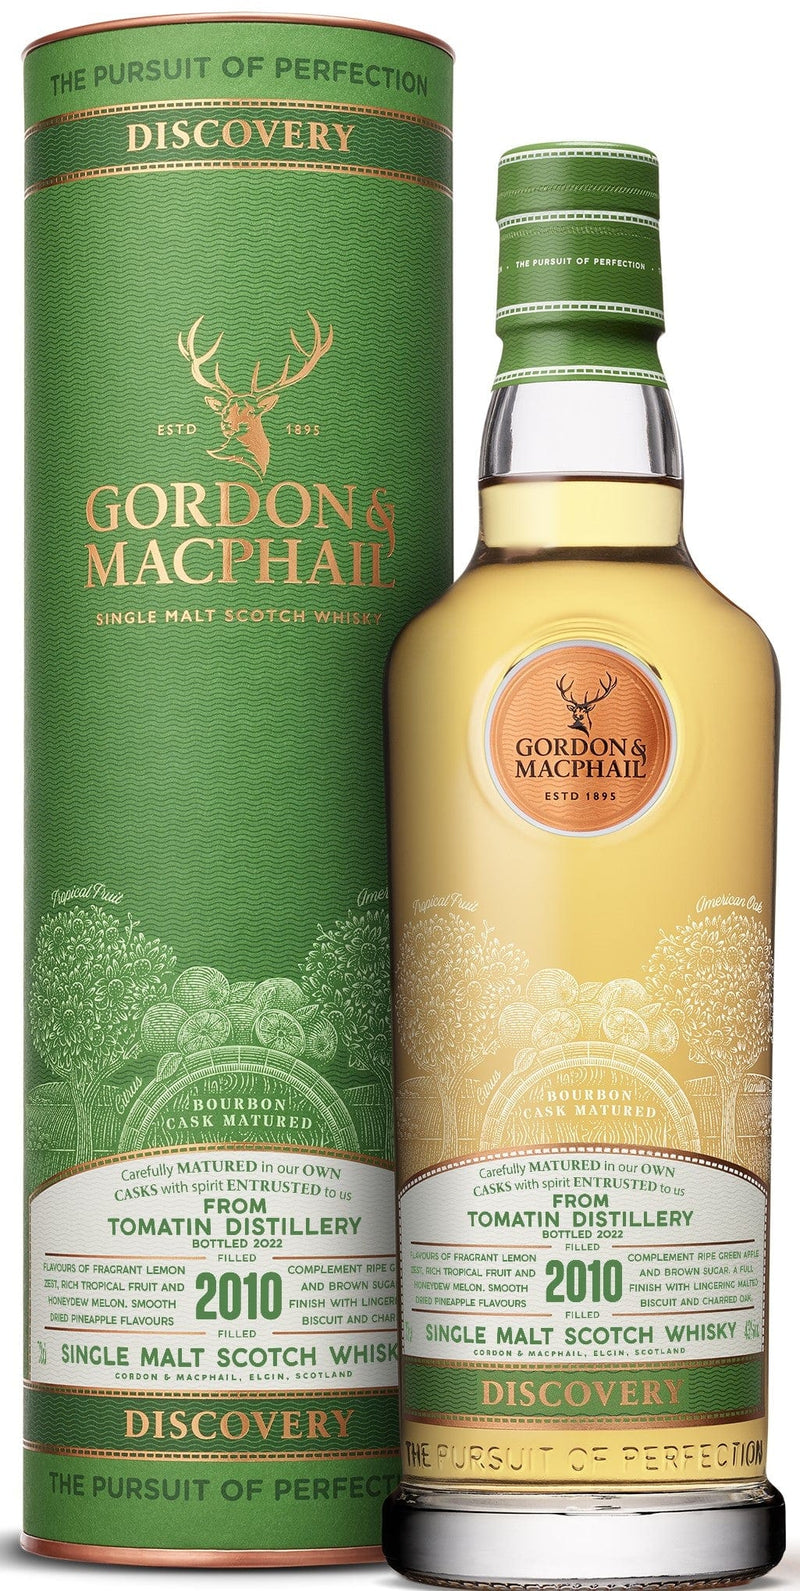 Tomatin Discovery 2010 70cl (Gordon & MacPhail Discovery)